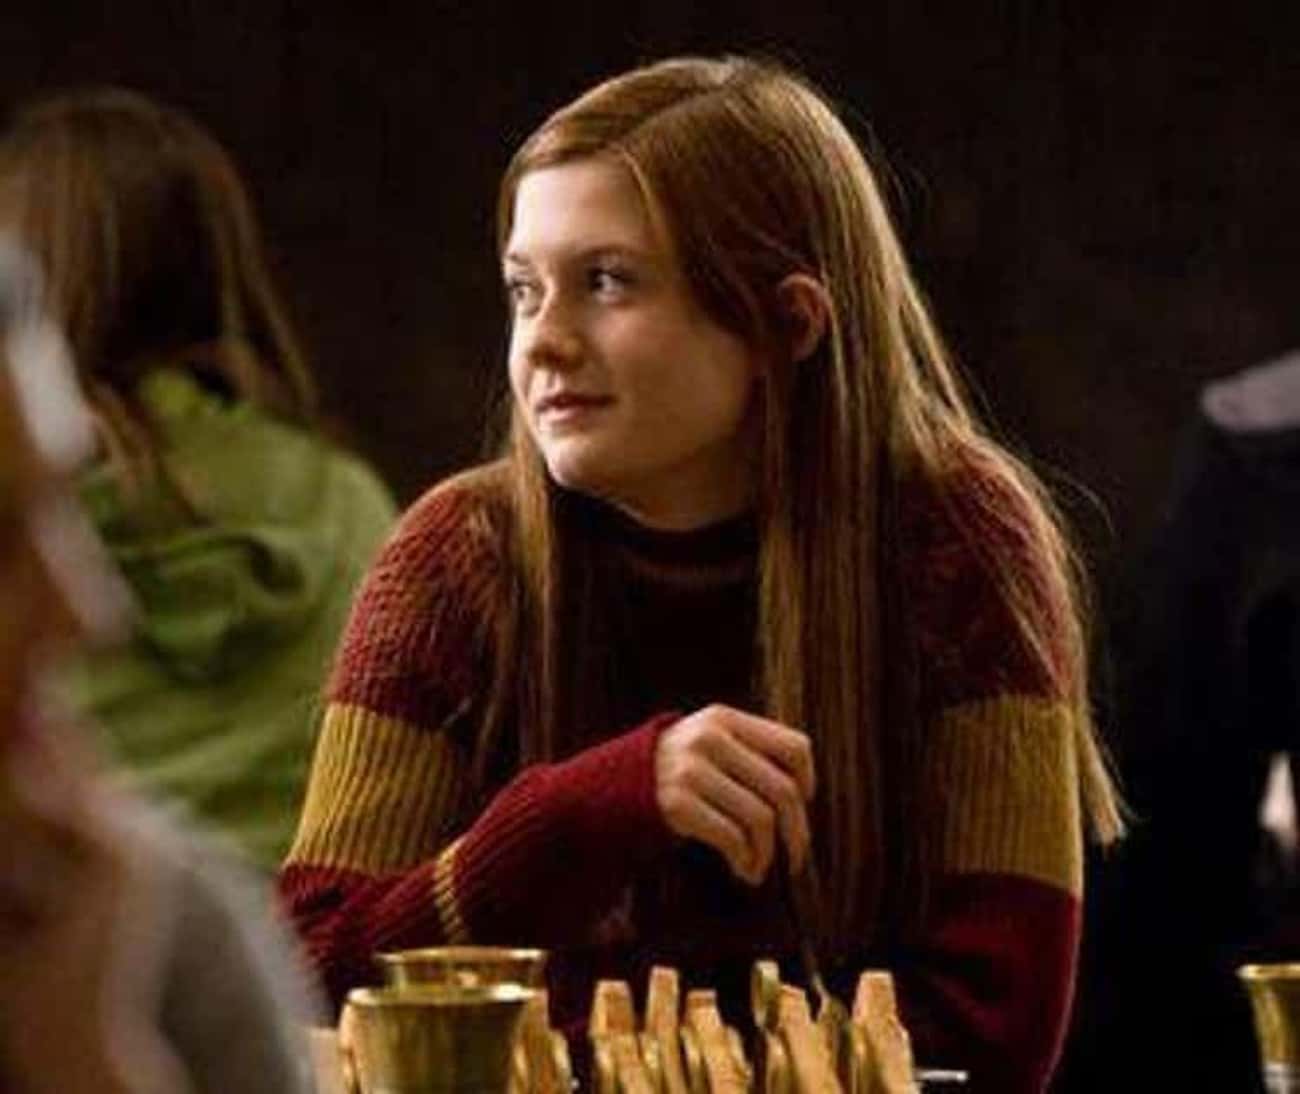 Ginny Becomes A National Quidditch Player And Journalist